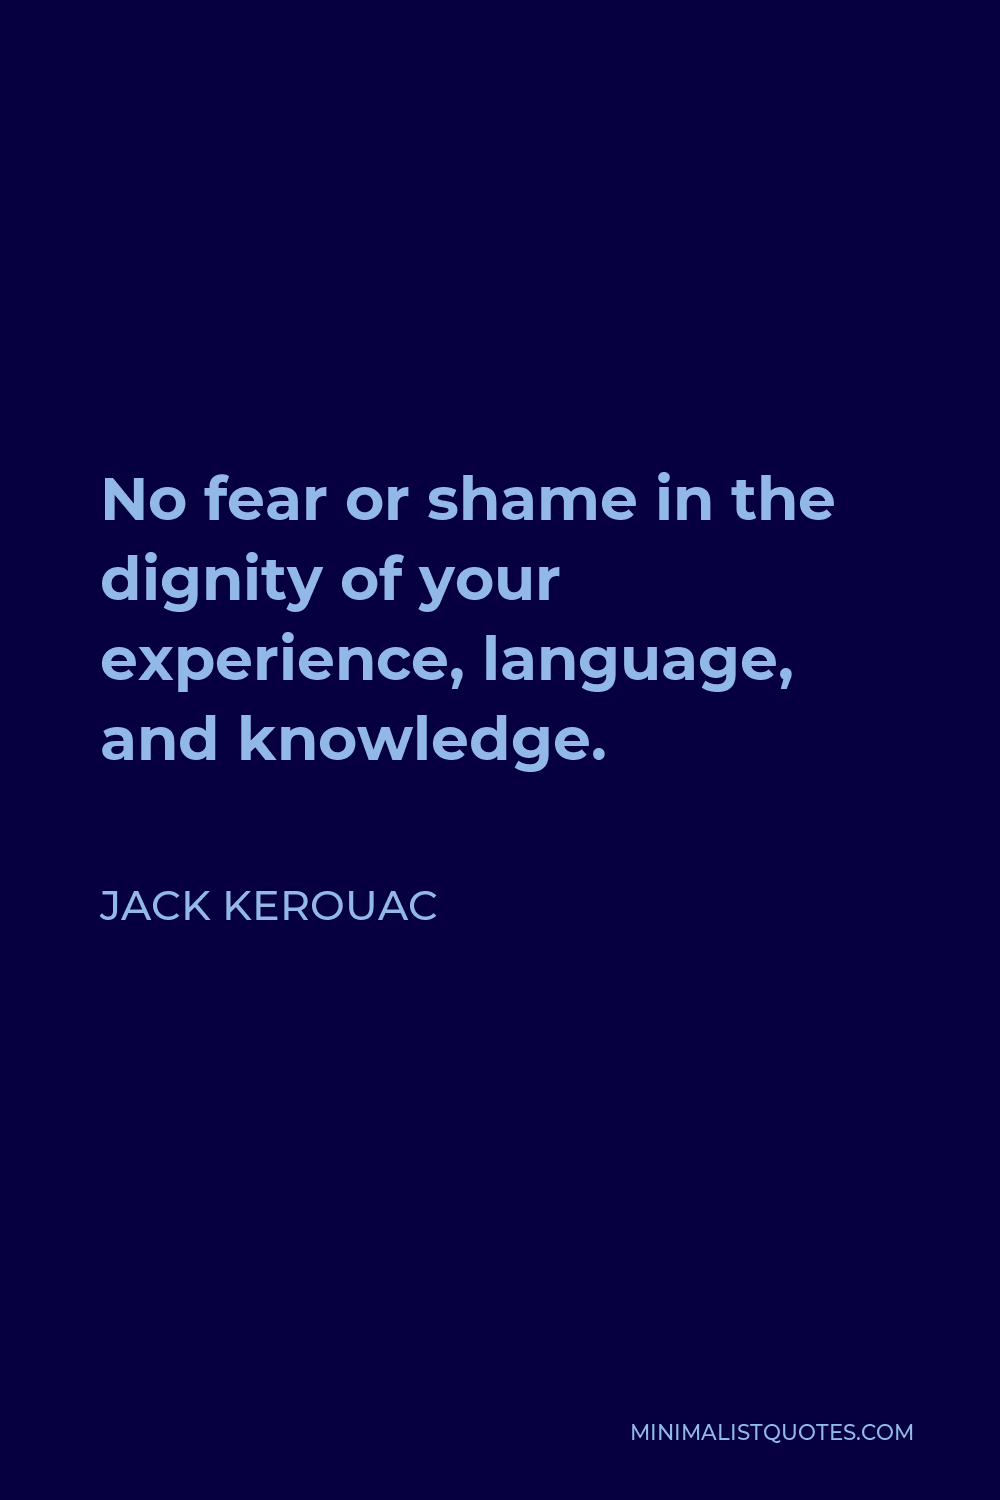 Jack Kerouac Quote - No fear or shame in the dignity of your experience, language, and knowledge.